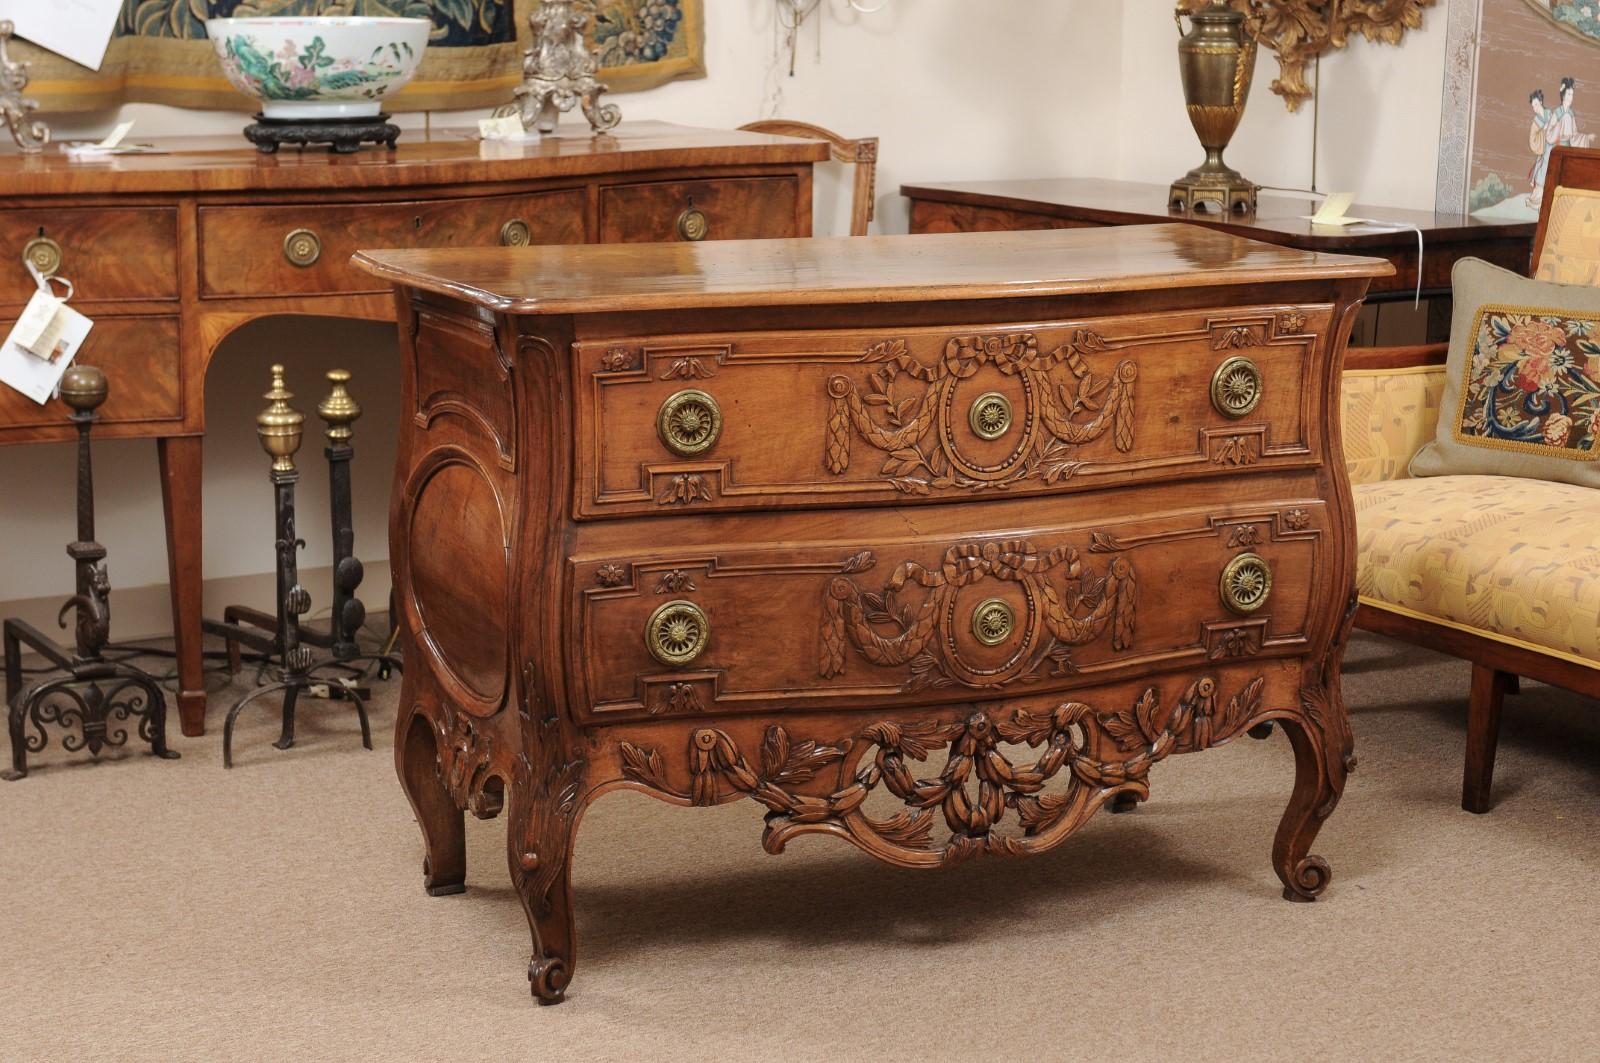 18th century French Transitional Louis XV/XVI 2-drawer commode in walnut with pierced apron and cabriole legs.